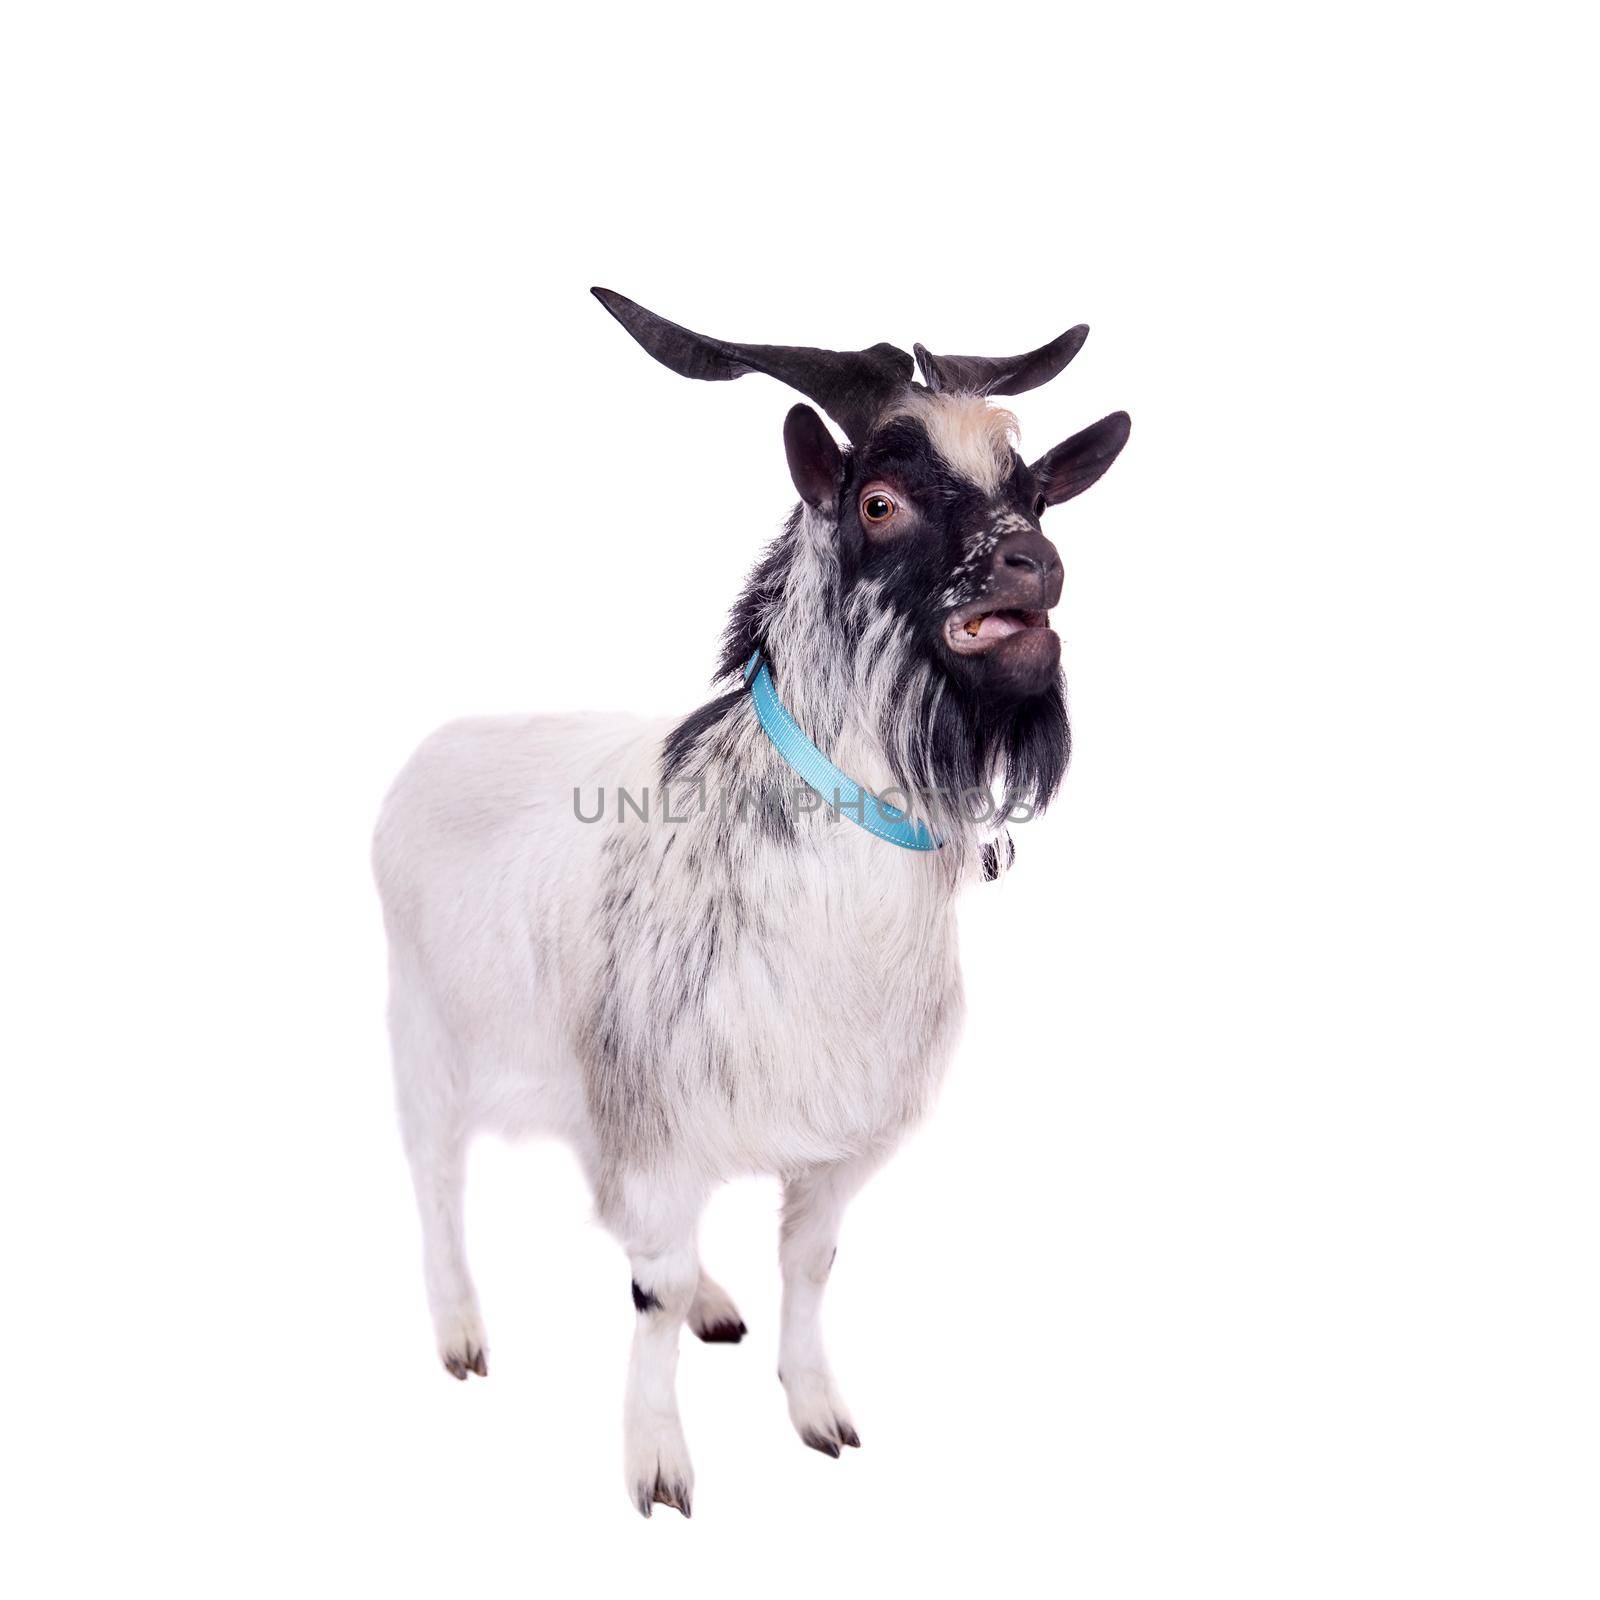 Funny gray goat isolated on white background